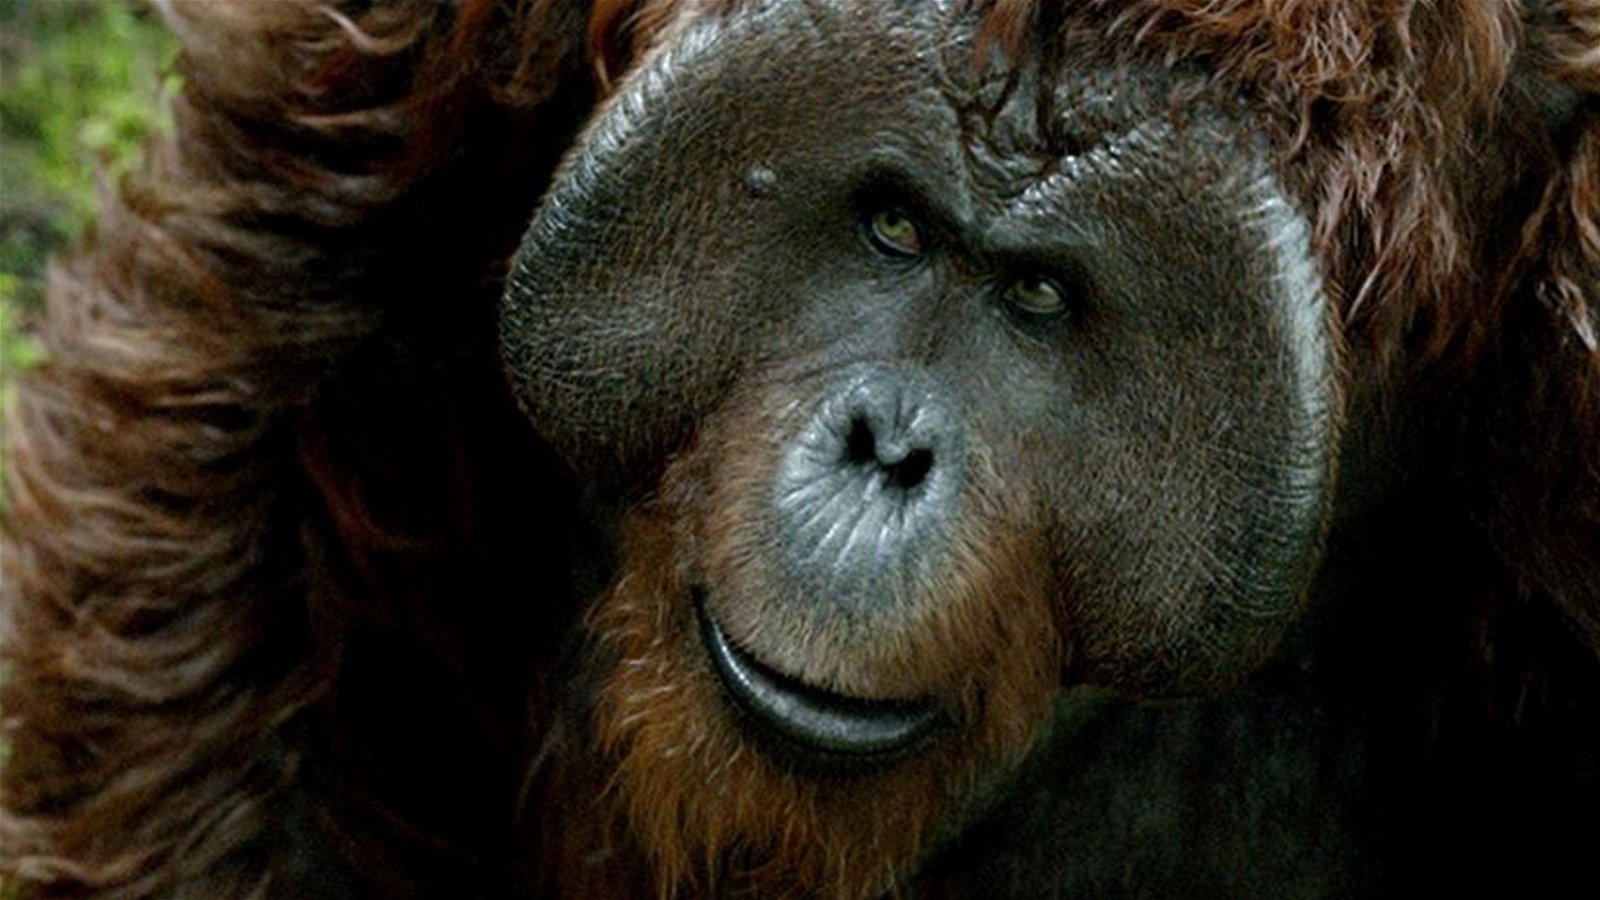 Karin Konoval Talks War For The Planet Planet Of The Apes - Interview 2